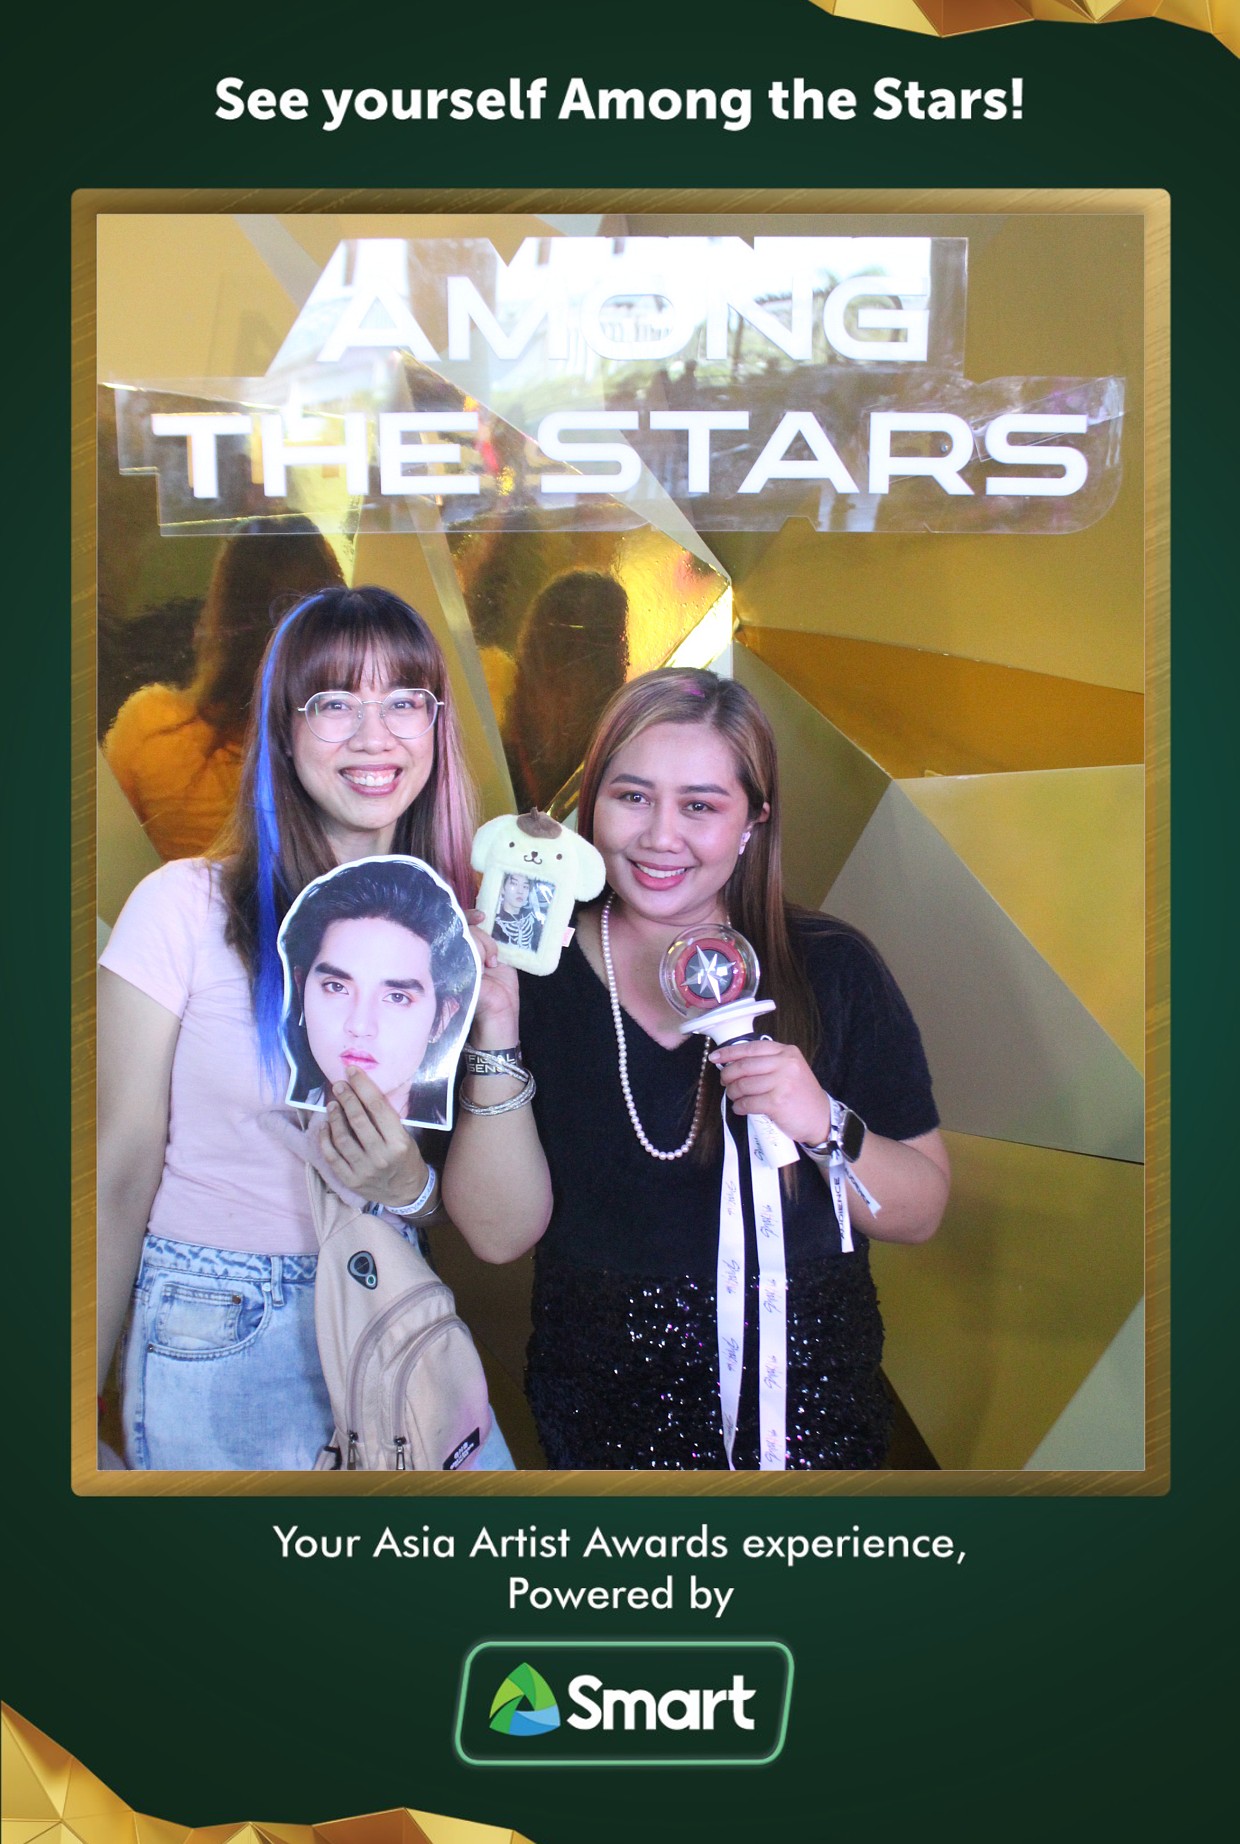 Asia Artist Awards by Smart Batch 2 – Mirror Booth